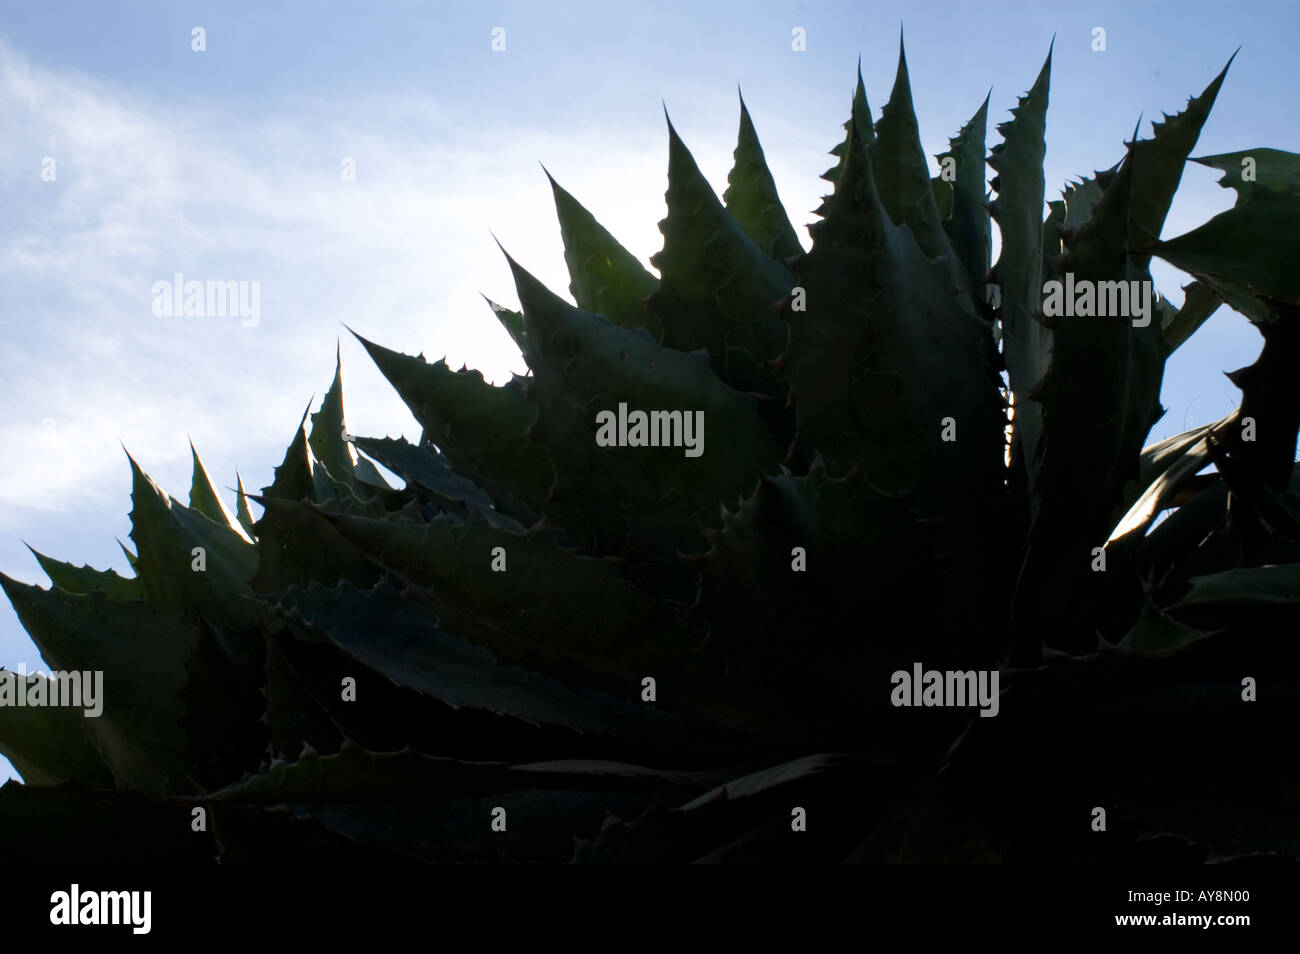 The maguey agave cupreata plant which is used to produce the alcoholic drink mezcal. Stock Photo